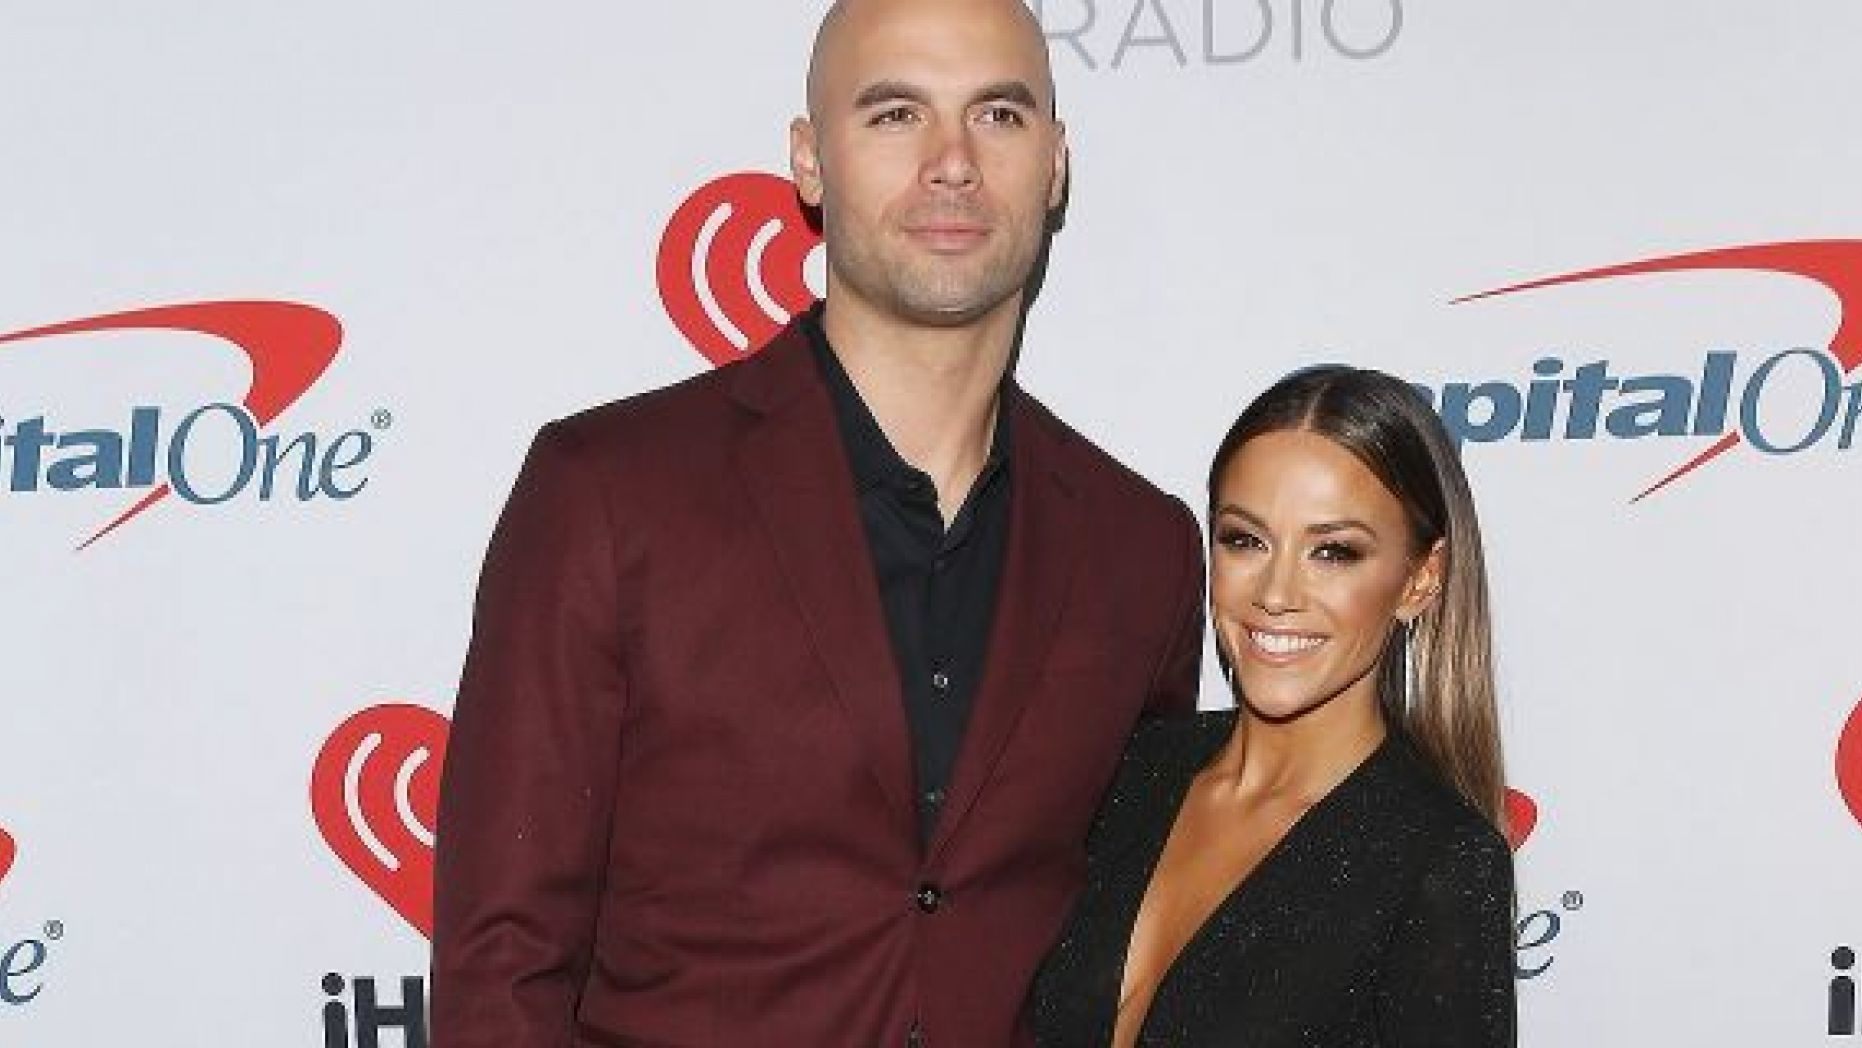 Jana Kramer said she was "so proud" of husband Mike Caussin for speaking about his battle with sex addiction.